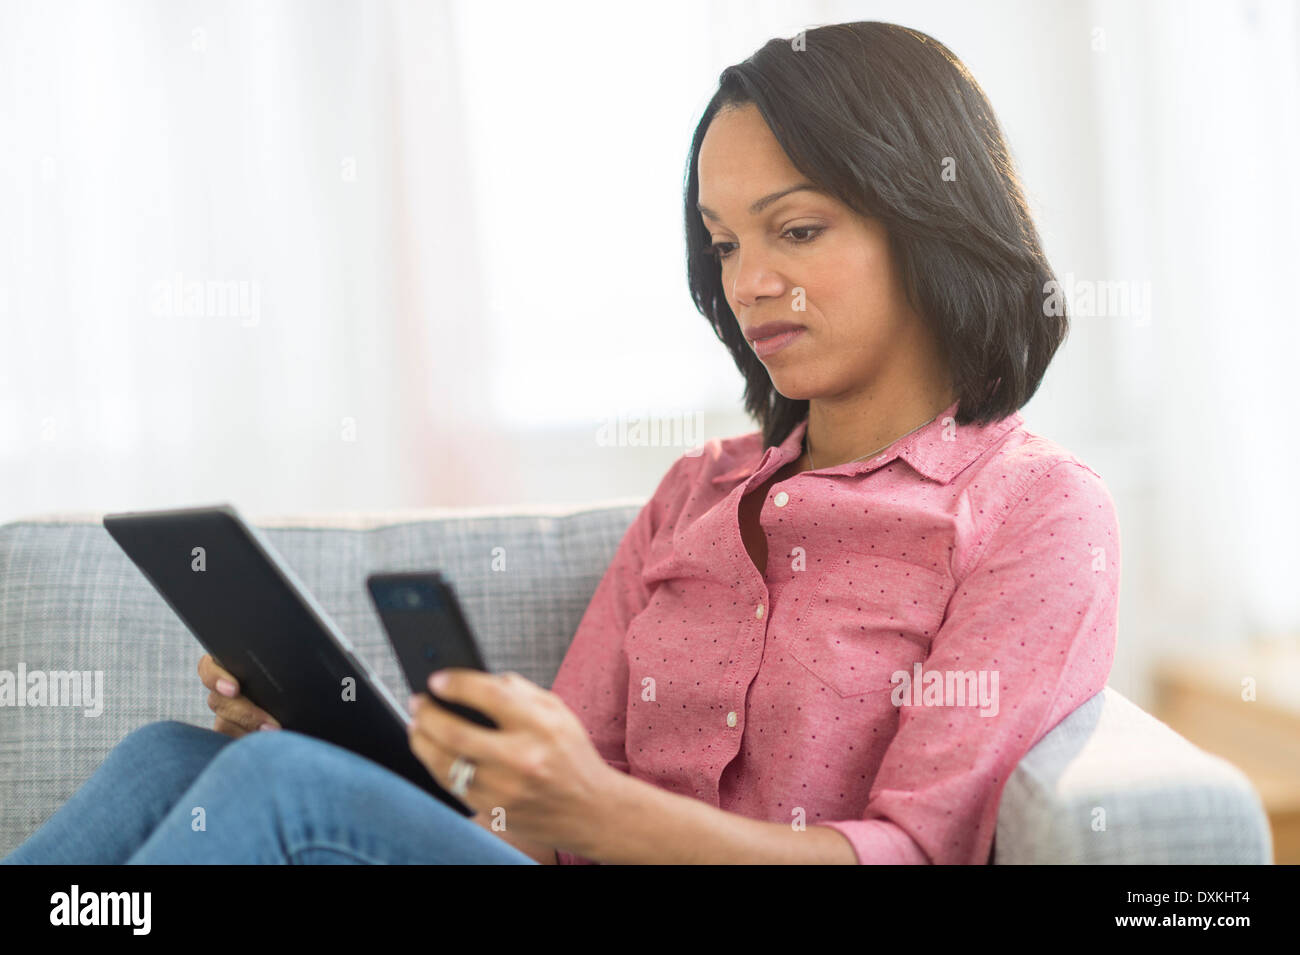 African American Woman using cell phone and digital tablet Banque D'Images